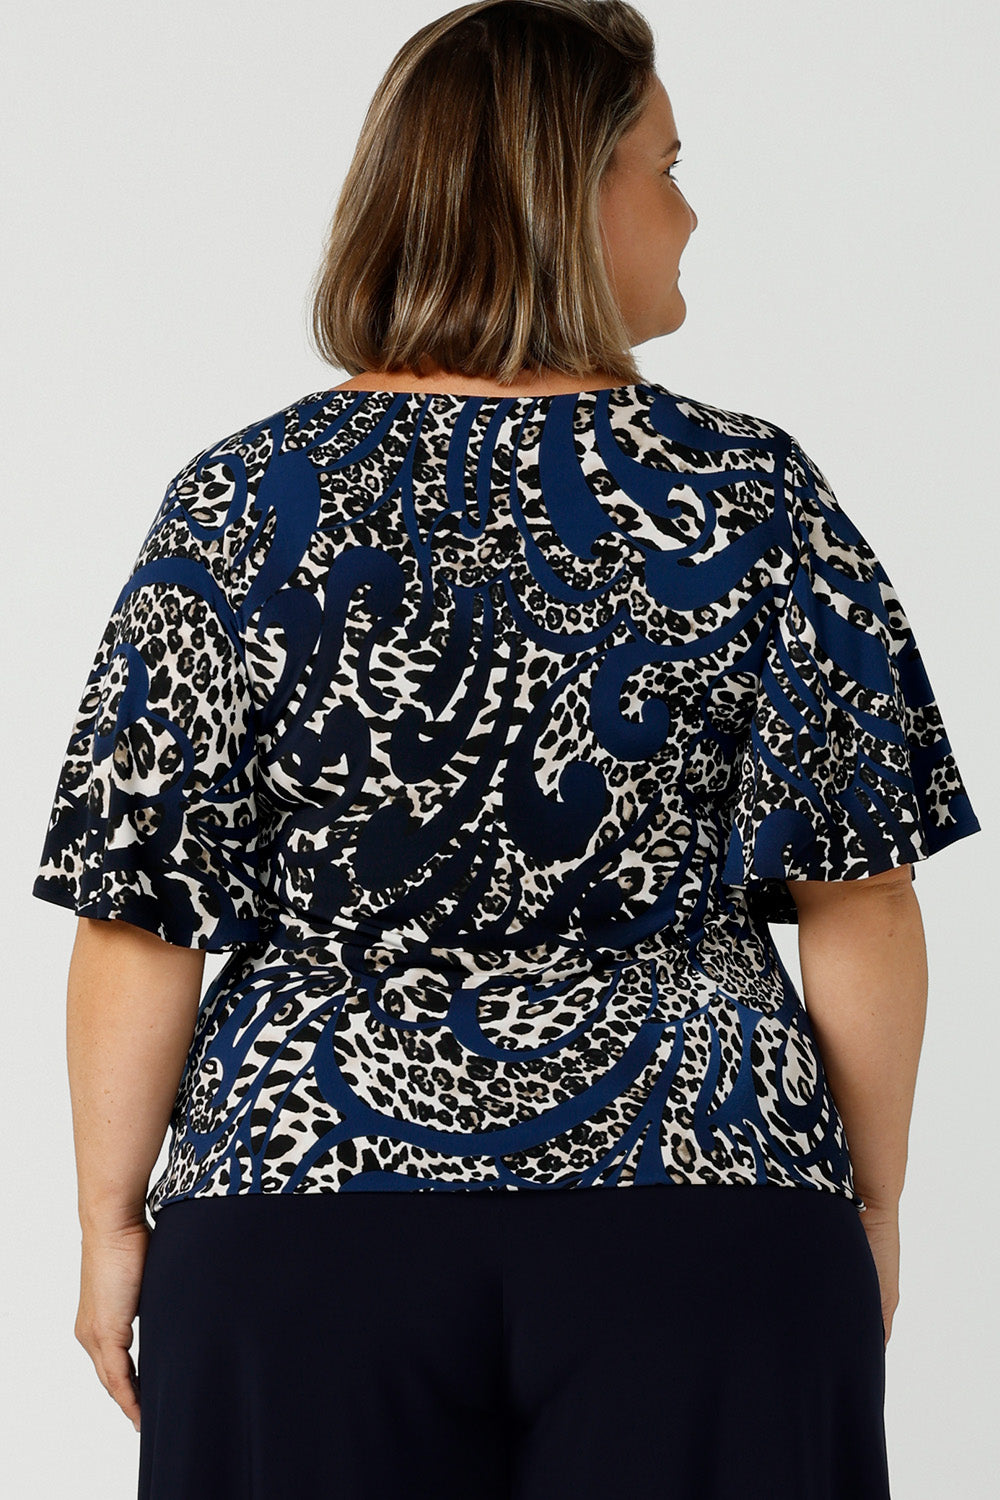 Back view of a petite height size 16 woman wears a jersey top in animal print, styled with navy wide leg pants. This Australian-made women's top has flutter sleeves, a high, round neckline and and high-low hem perfect for weekend casual and travel capsule wardrobes.